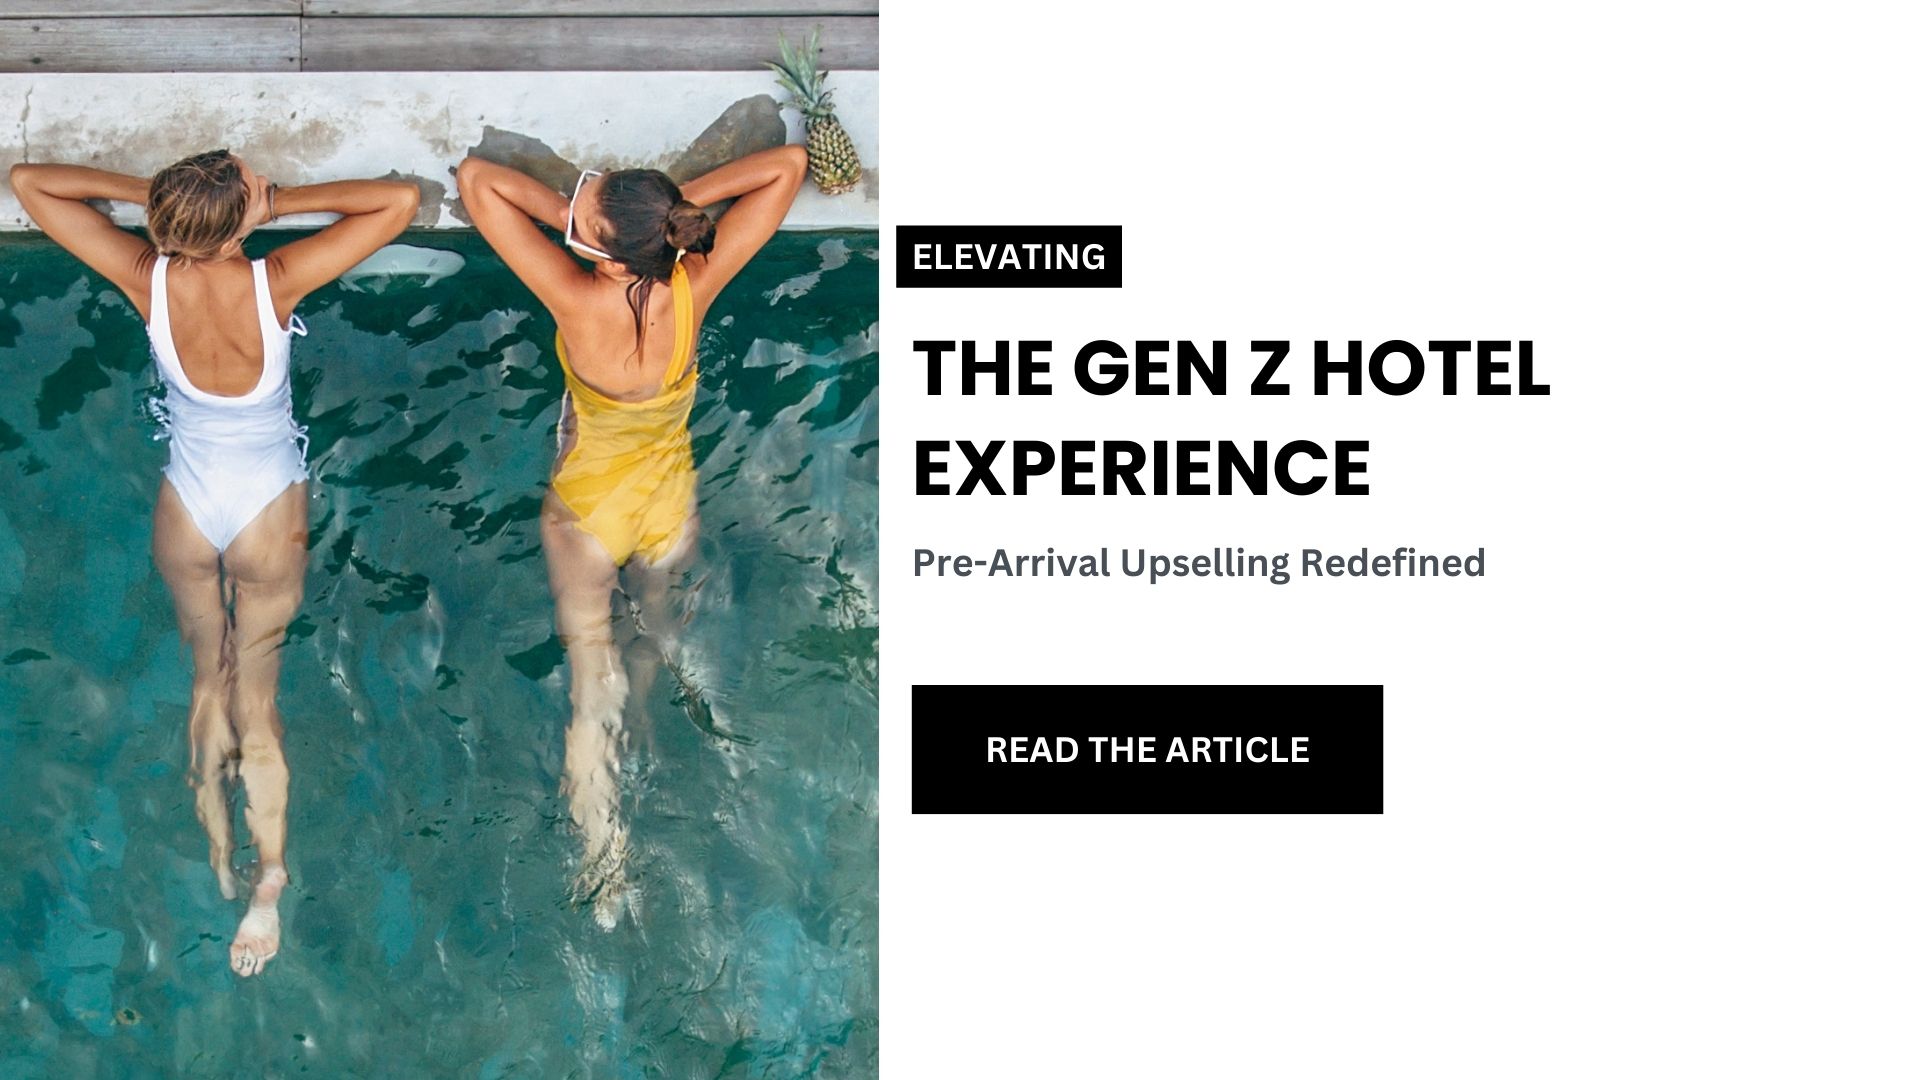 The image is a split-content design with a photo on the left and text on the right. On the left, two women are seen from an overhead perspective, relaxing in a swimming pool with their heads resting on the pool edge, one wearing a white swimsuit and the other in yellow. On the right, there is black text on a white background that reads "ELEVATING THE GEN Z HOTEL EXPERIENCE" followed by "Pre-Arrival Upselling Redefined" and a button that says "READ THE ARTICLE".